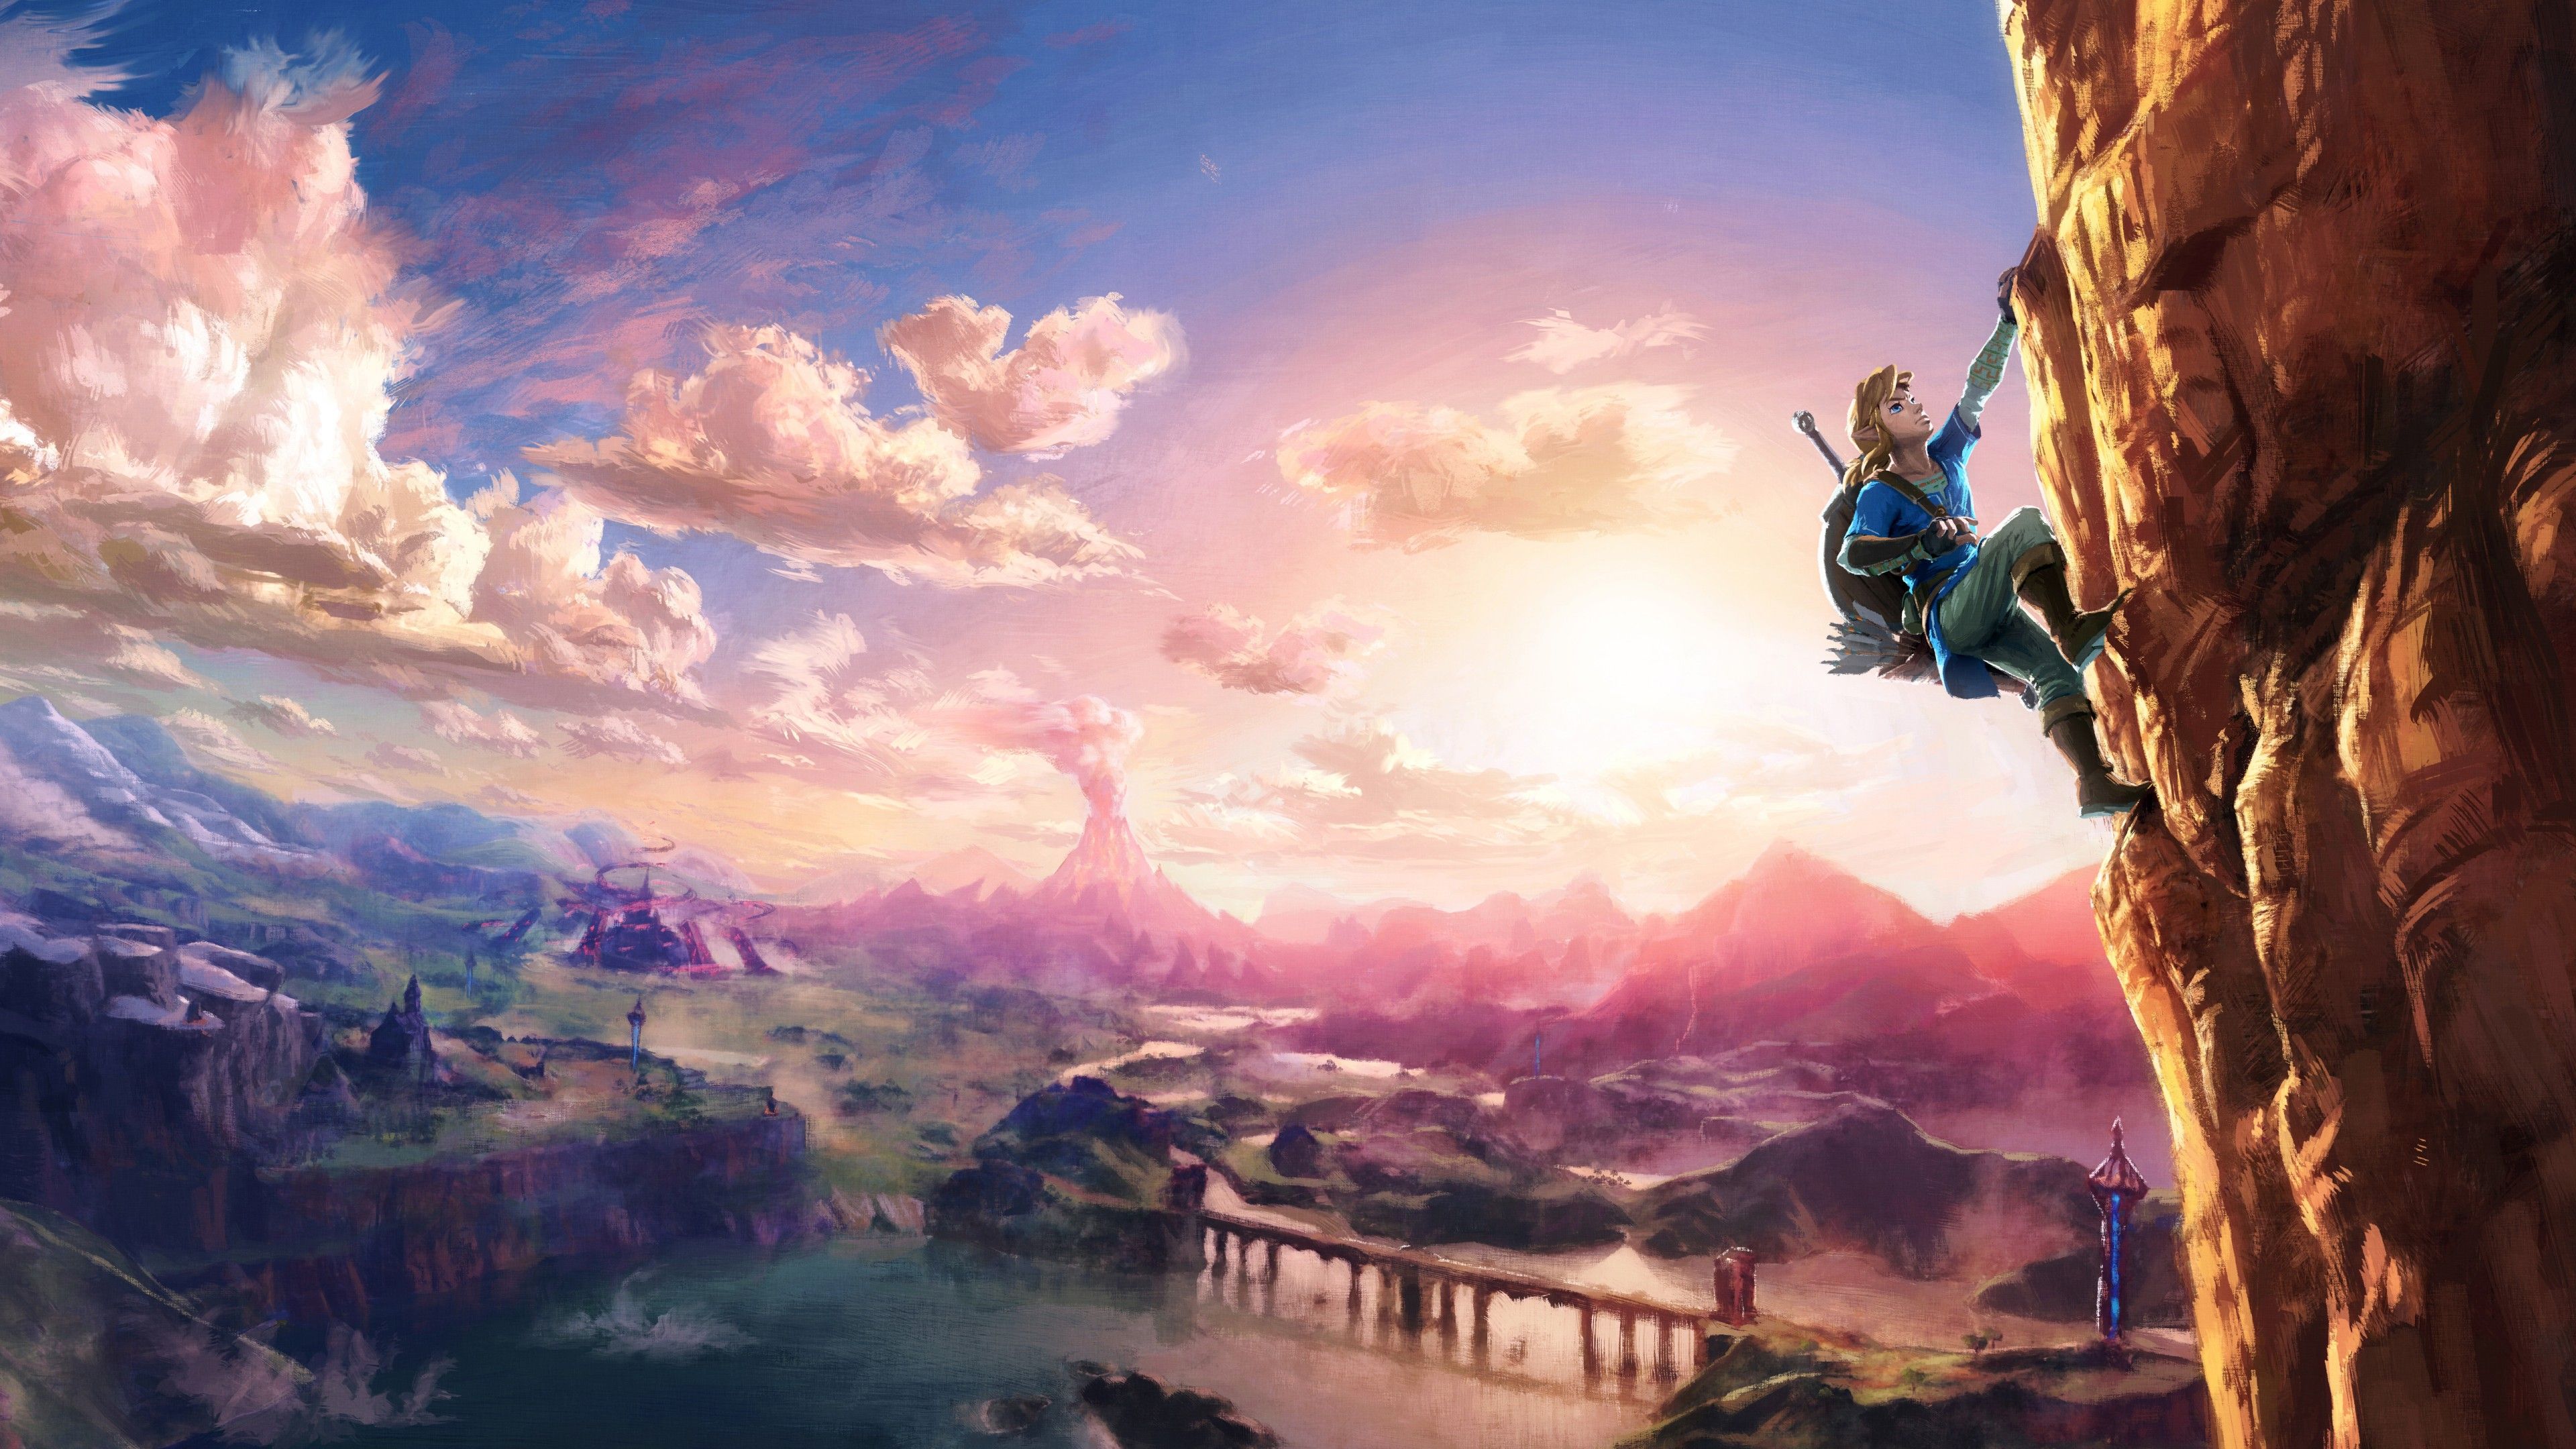 Wallpaper The Legend of Zelda, Breath of the Wild, 5K, Games,. Wallpaper for iPhone, Android, Mobile and Desktop